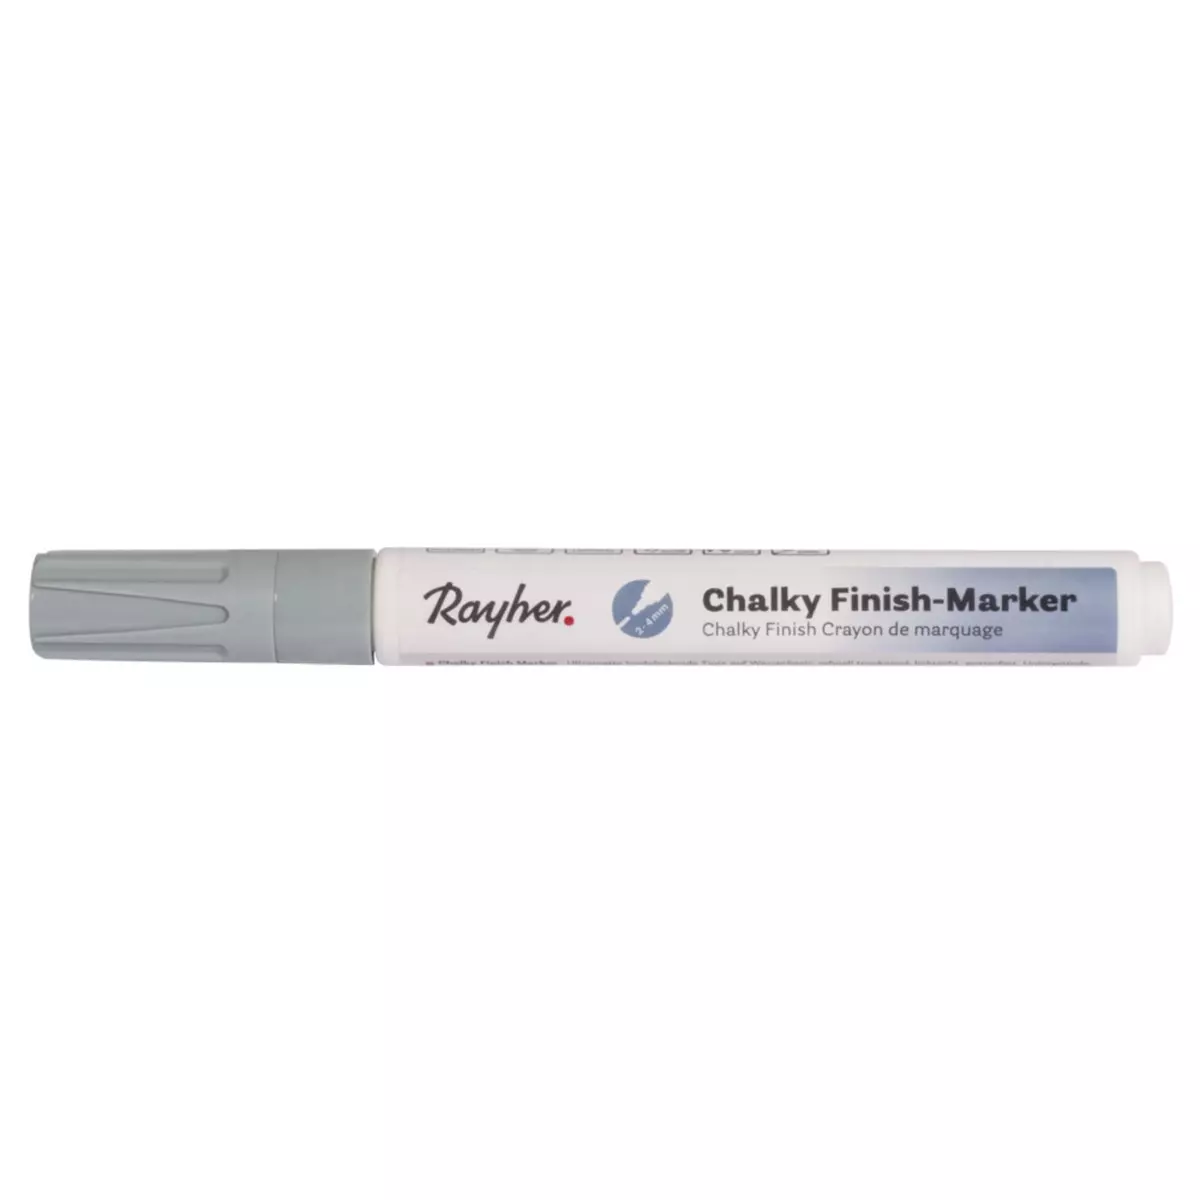 Rayher Chalky Finish Crayon de marquage, vert menthe, Pointe ronde 2 - 4mm, avec soupape